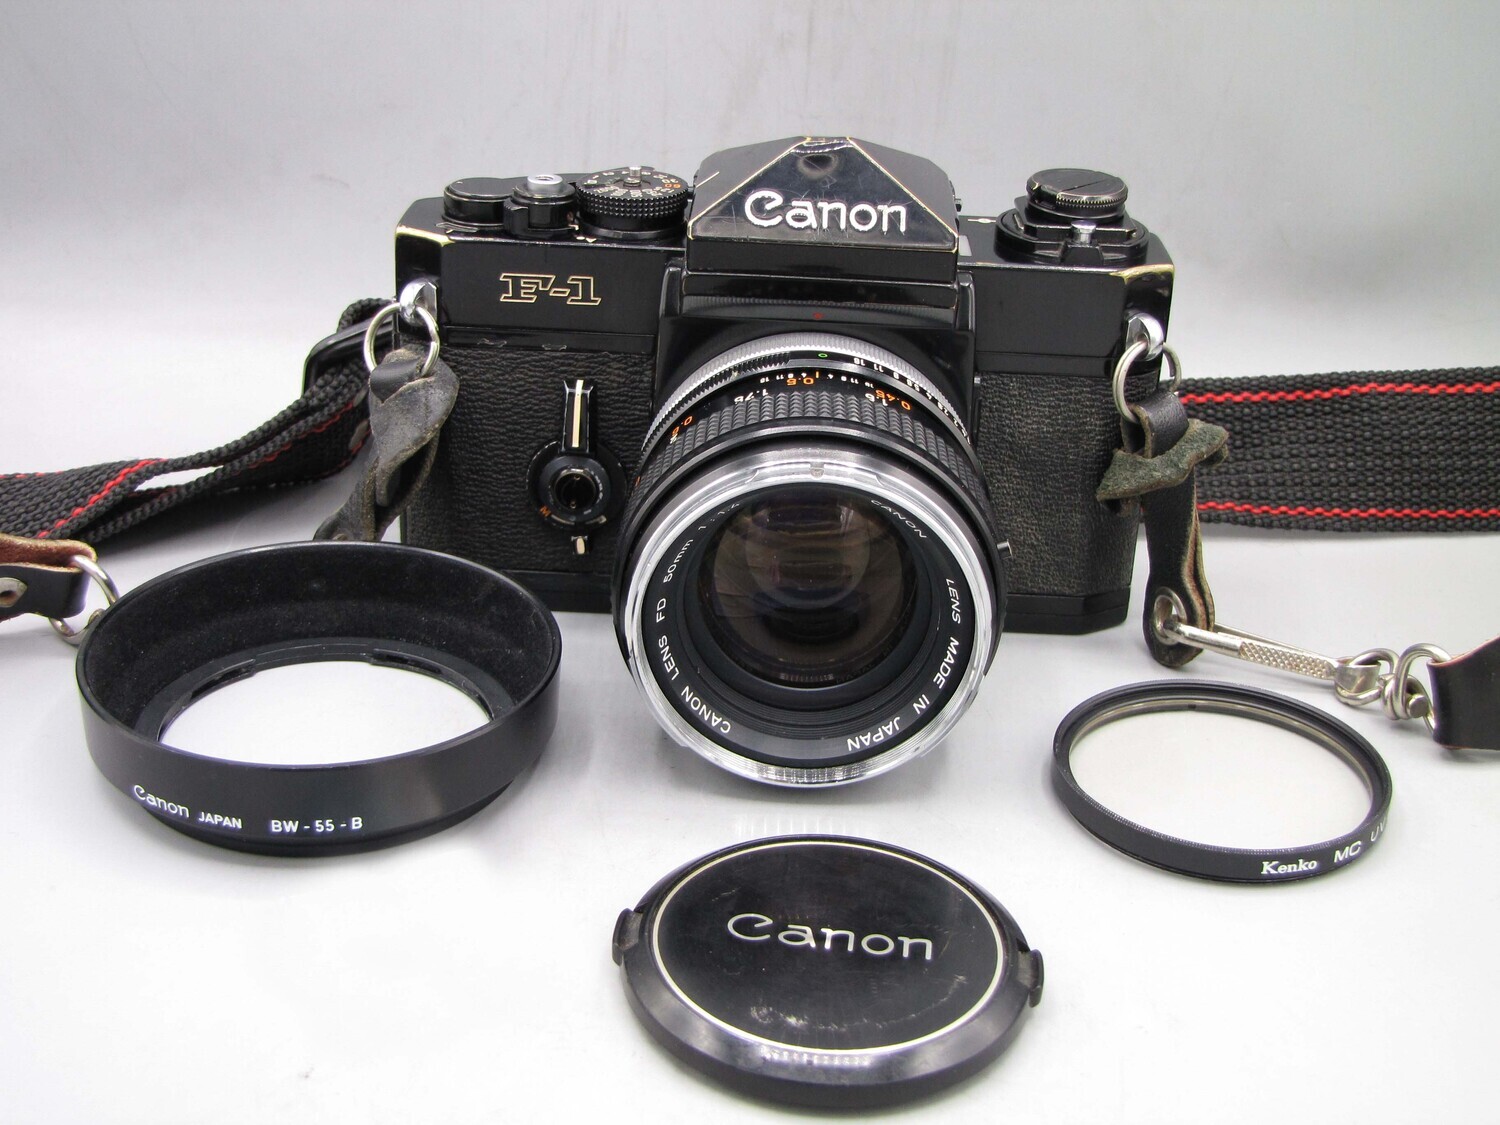 Canon F-1 35mm SLR Camera w 1.4/50 Seals Battery - As Is